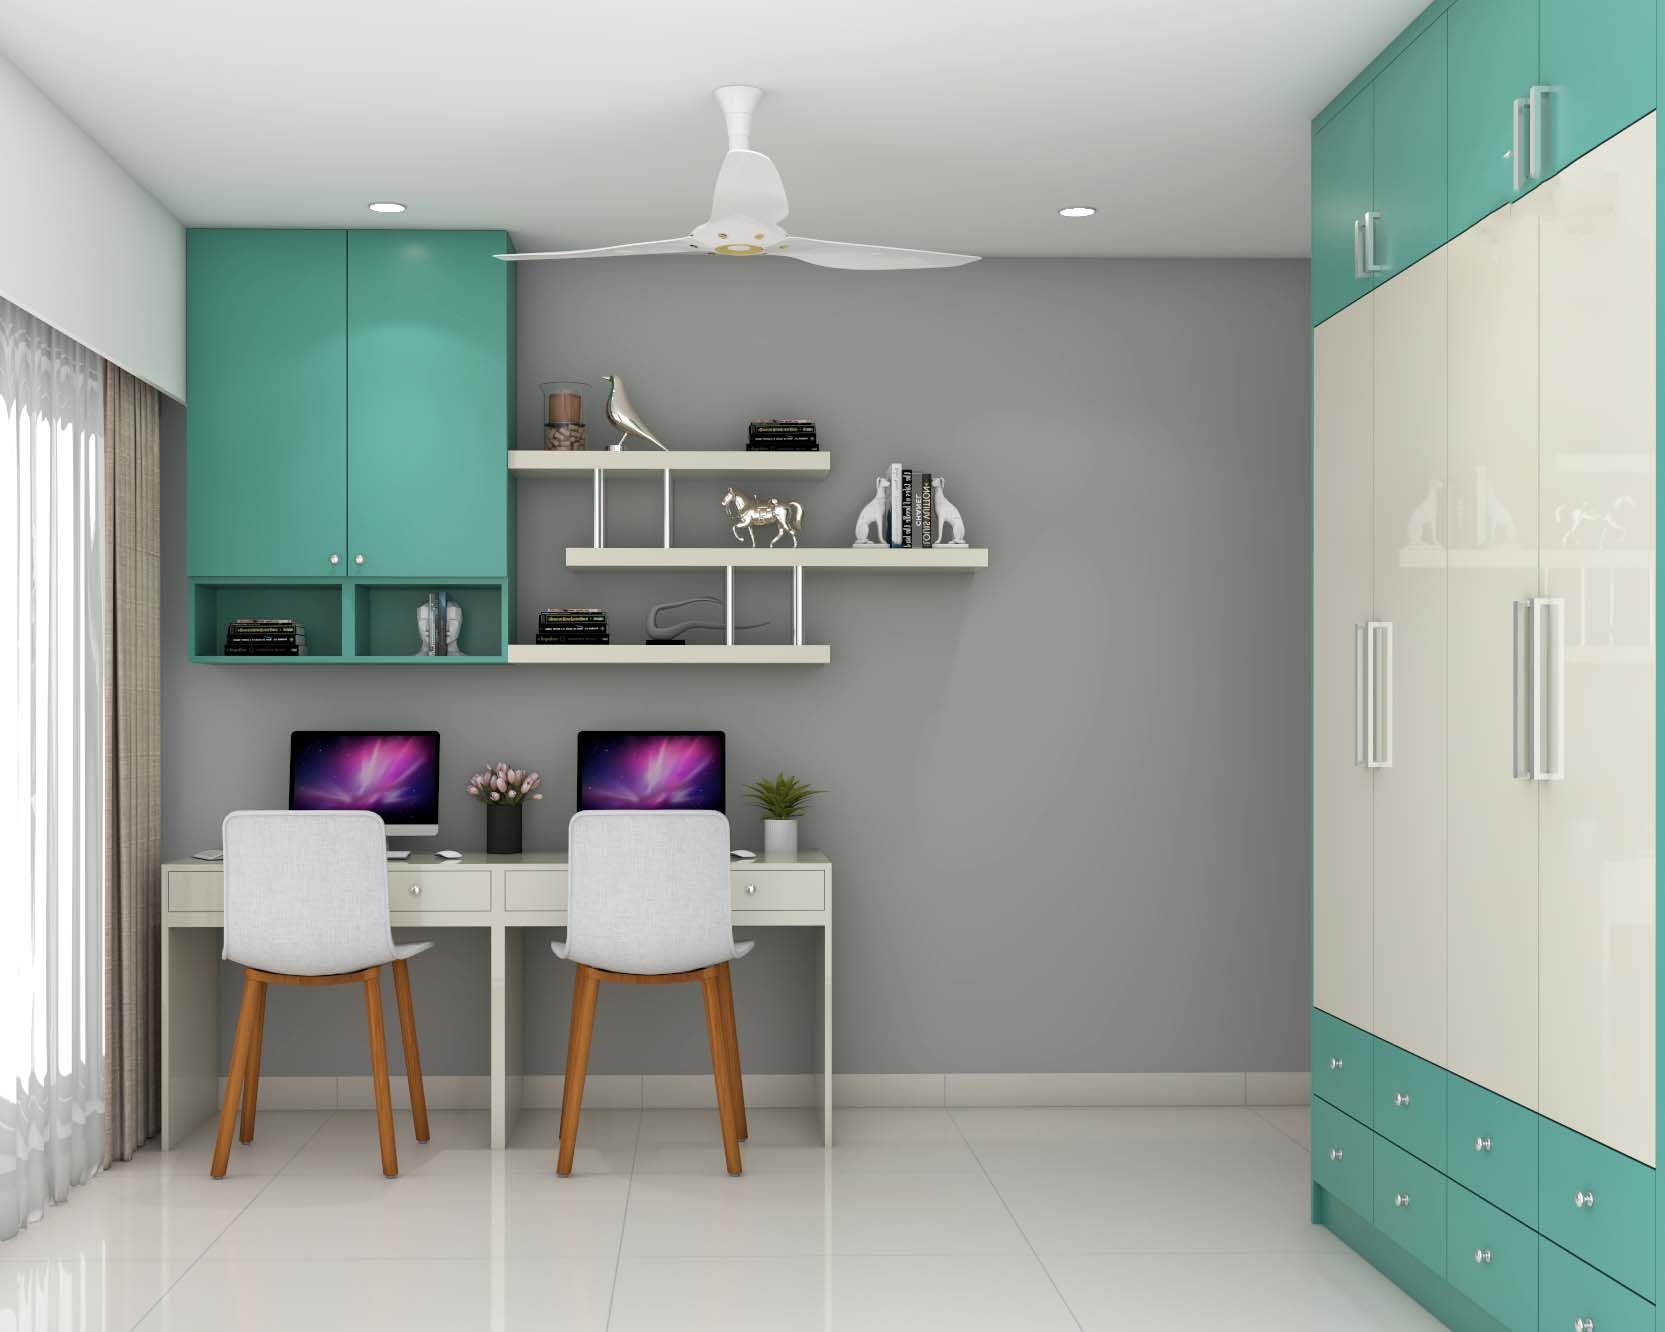 Contemporary Study Room Design With Aqua Green And Frosty White Wardrobe